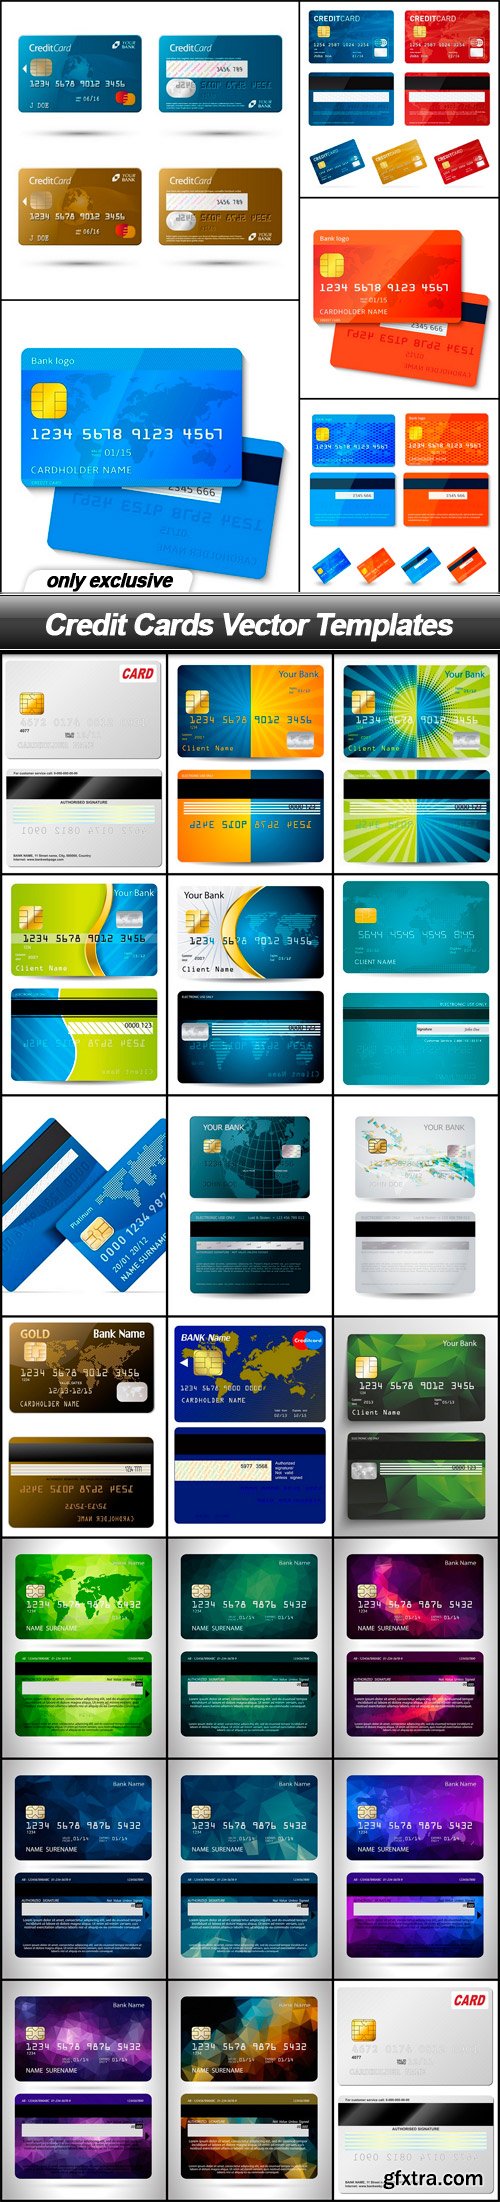 Credit Cards Vector Templates - 25 EPS